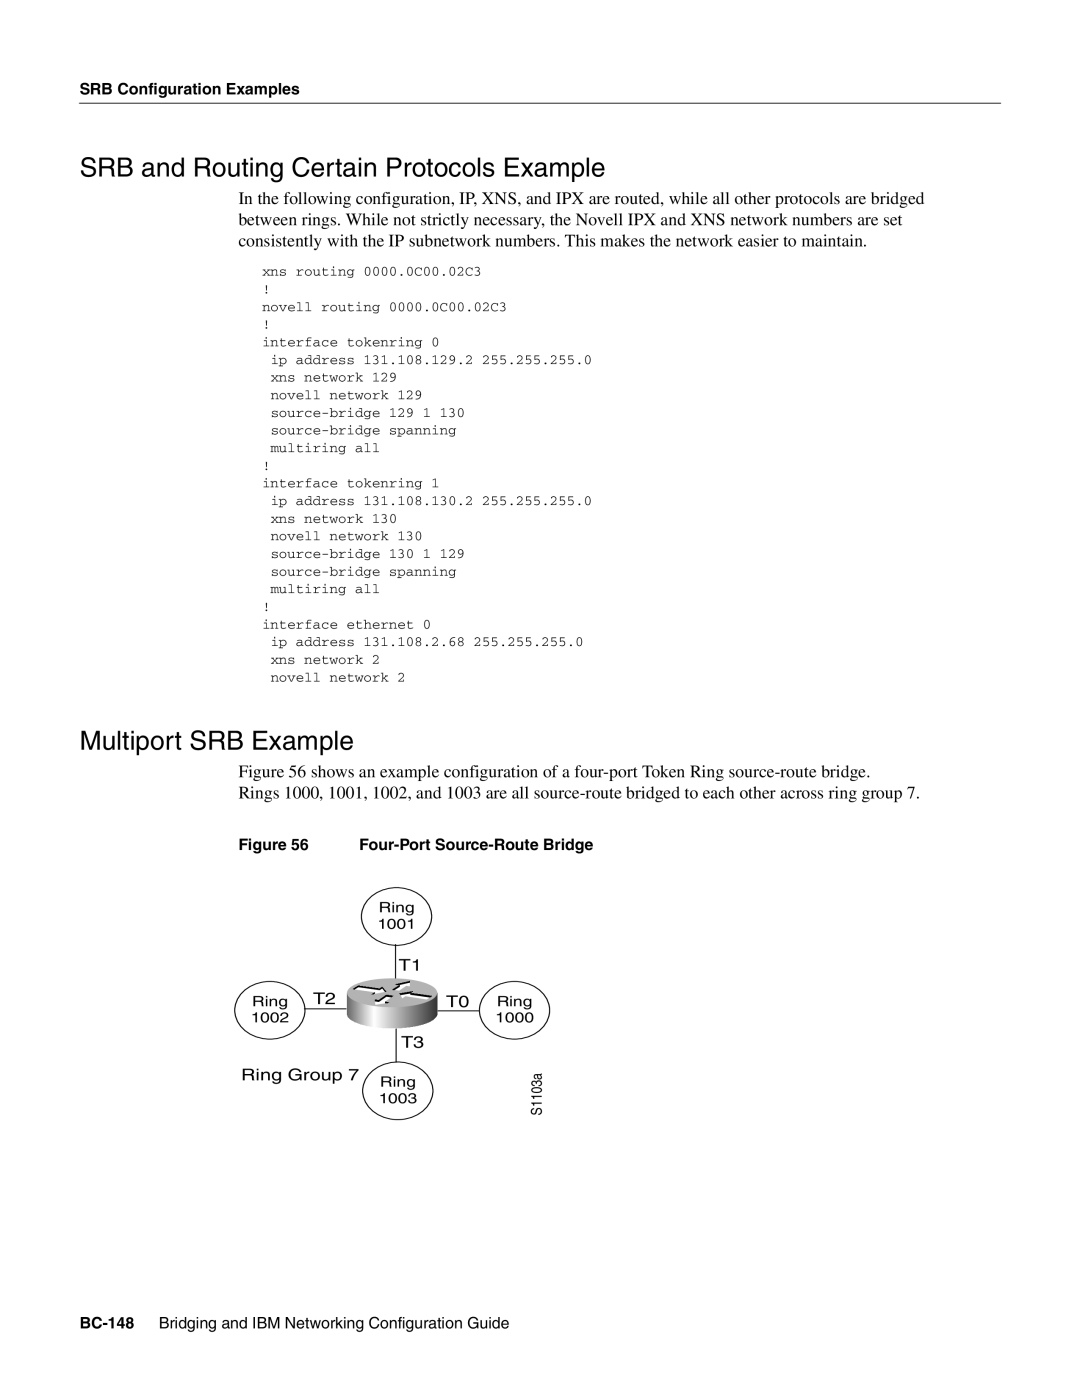 Cisco Systems BC-109 manual SRB and Routing Certain Protocols Example, Multiport SRB Example, S1103a 